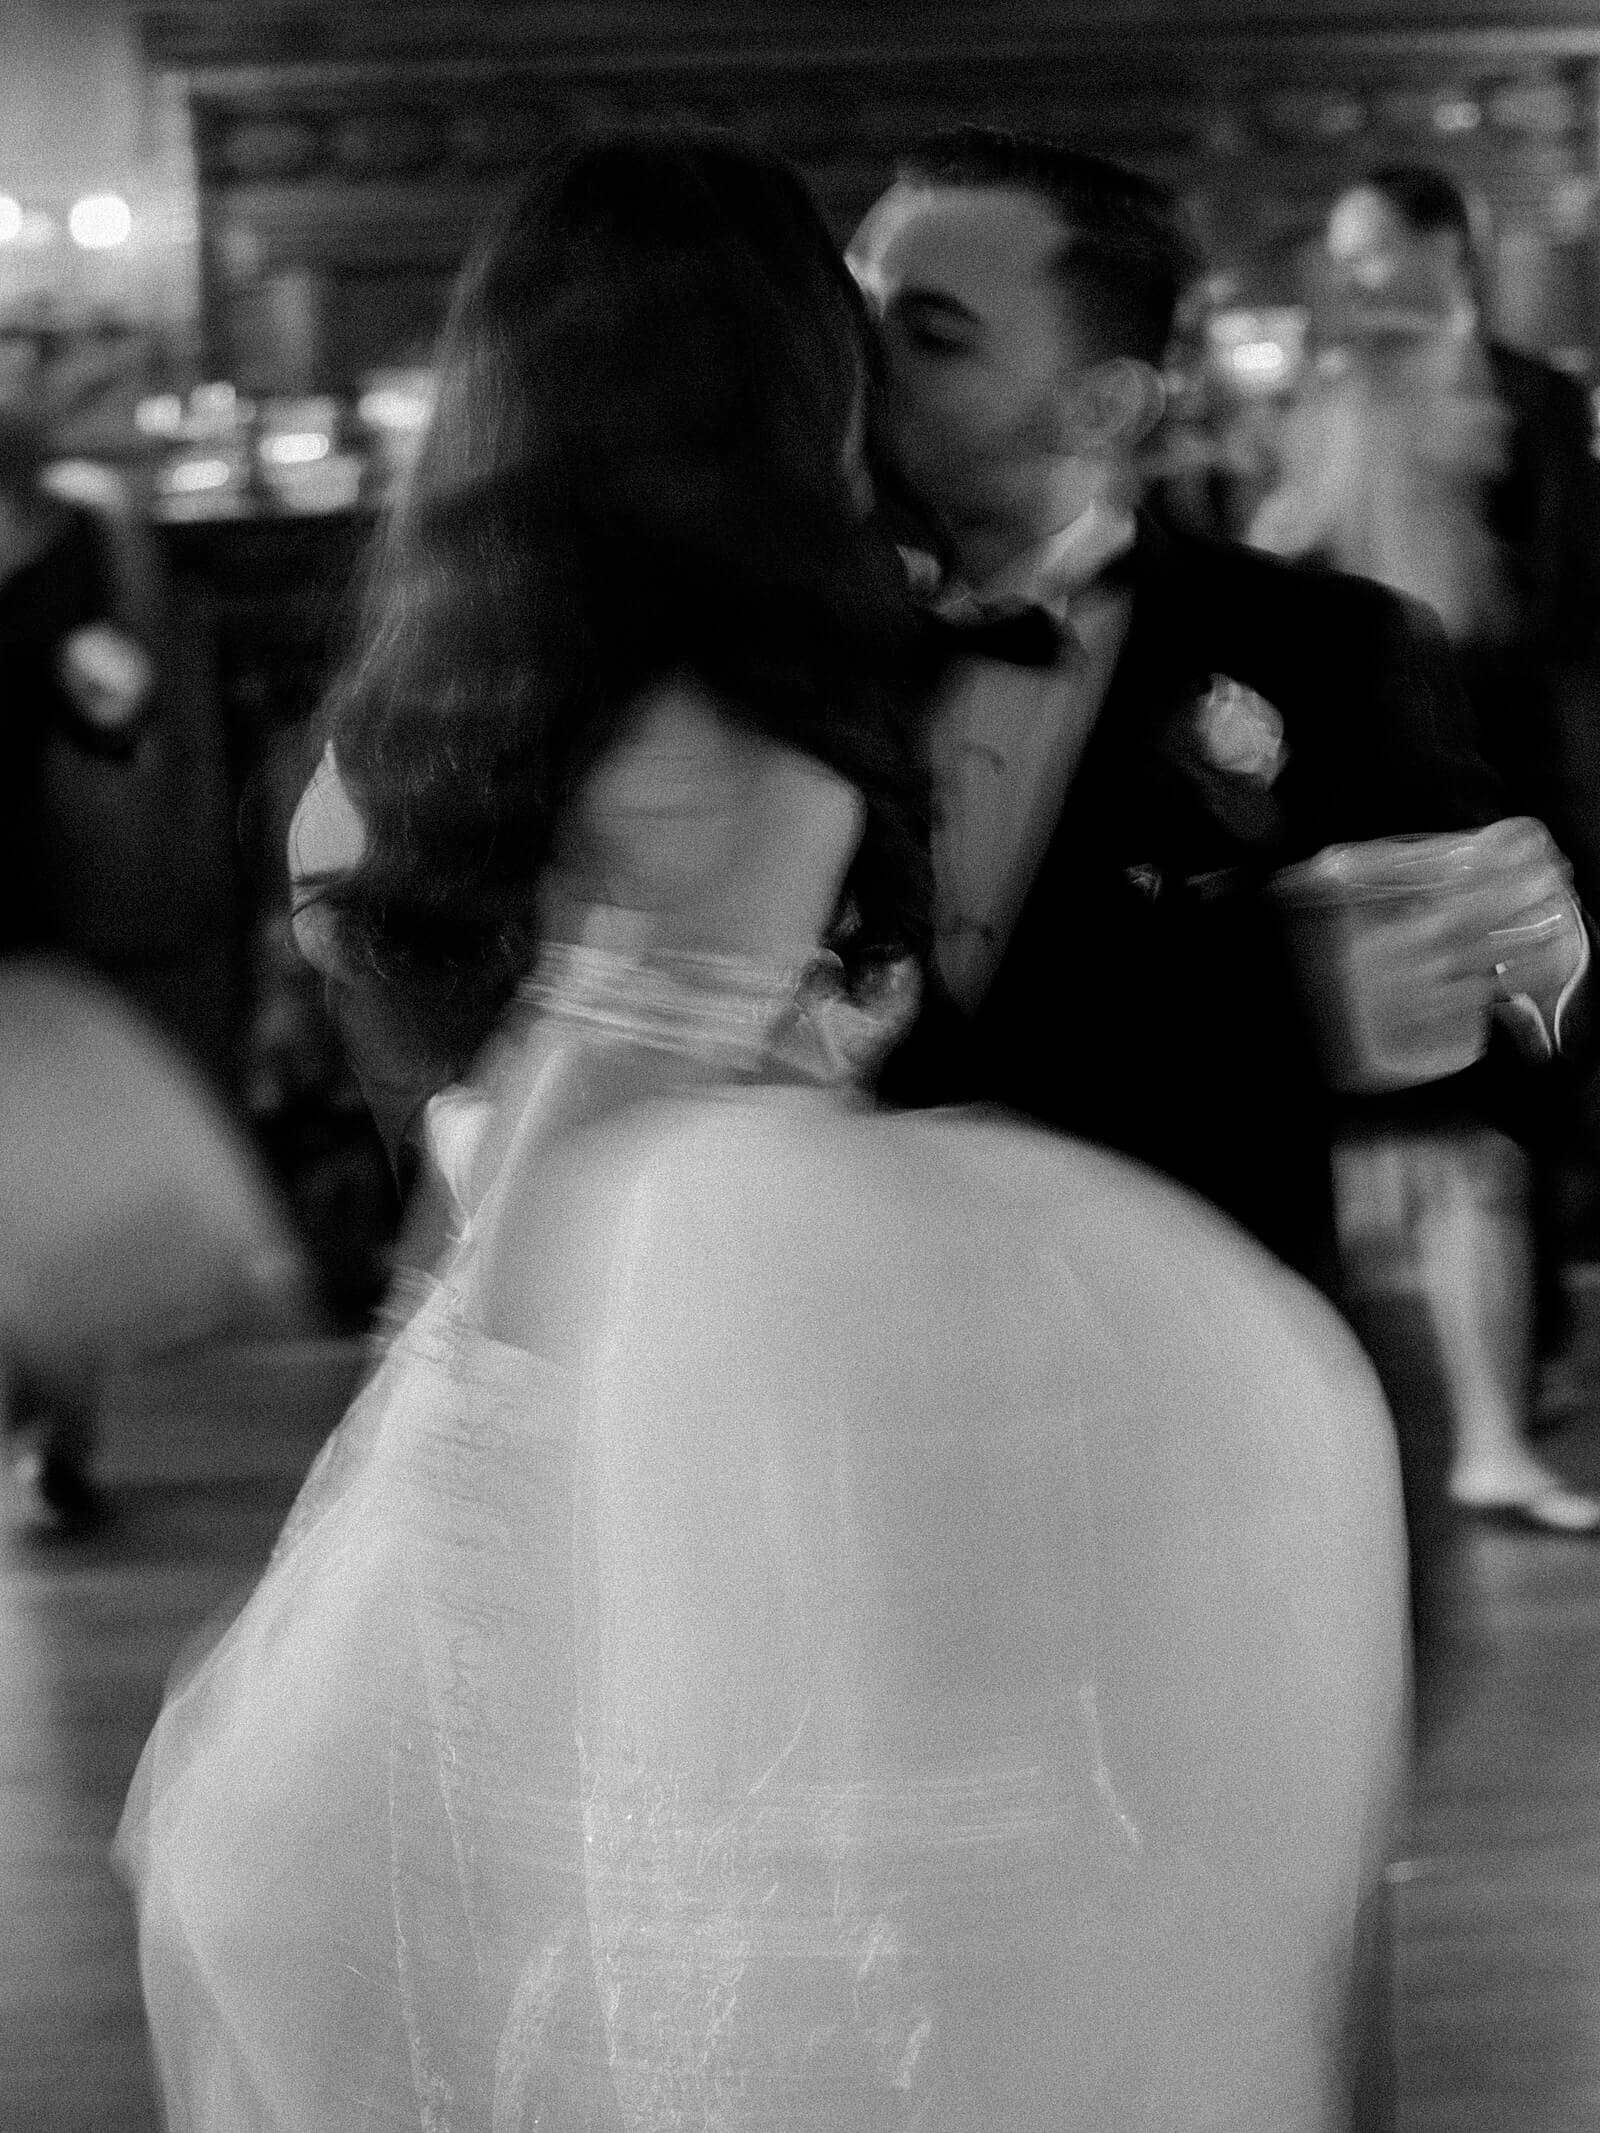 Bride and groom kiss in black and white motion blur photo at their wedding reception - Jacqueline Benét Photography